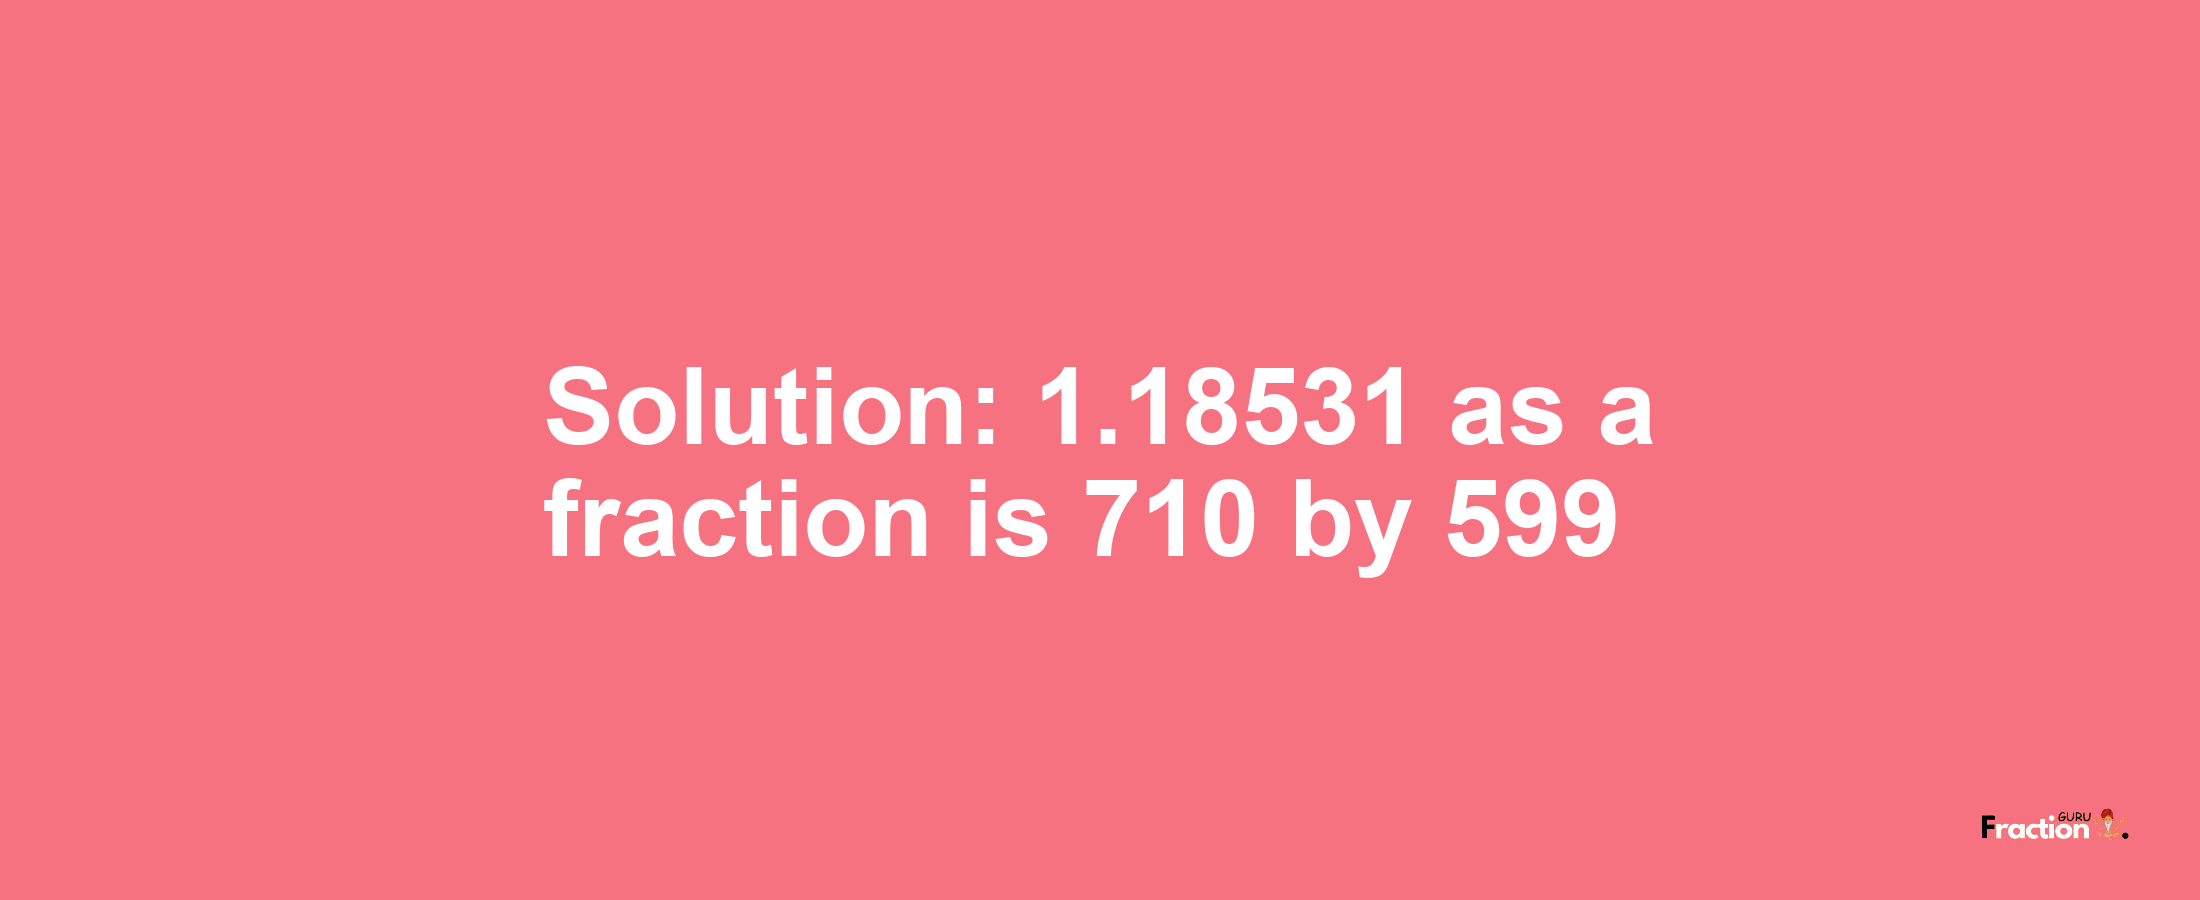 Solution:1.18531 as a fraction is 710/599